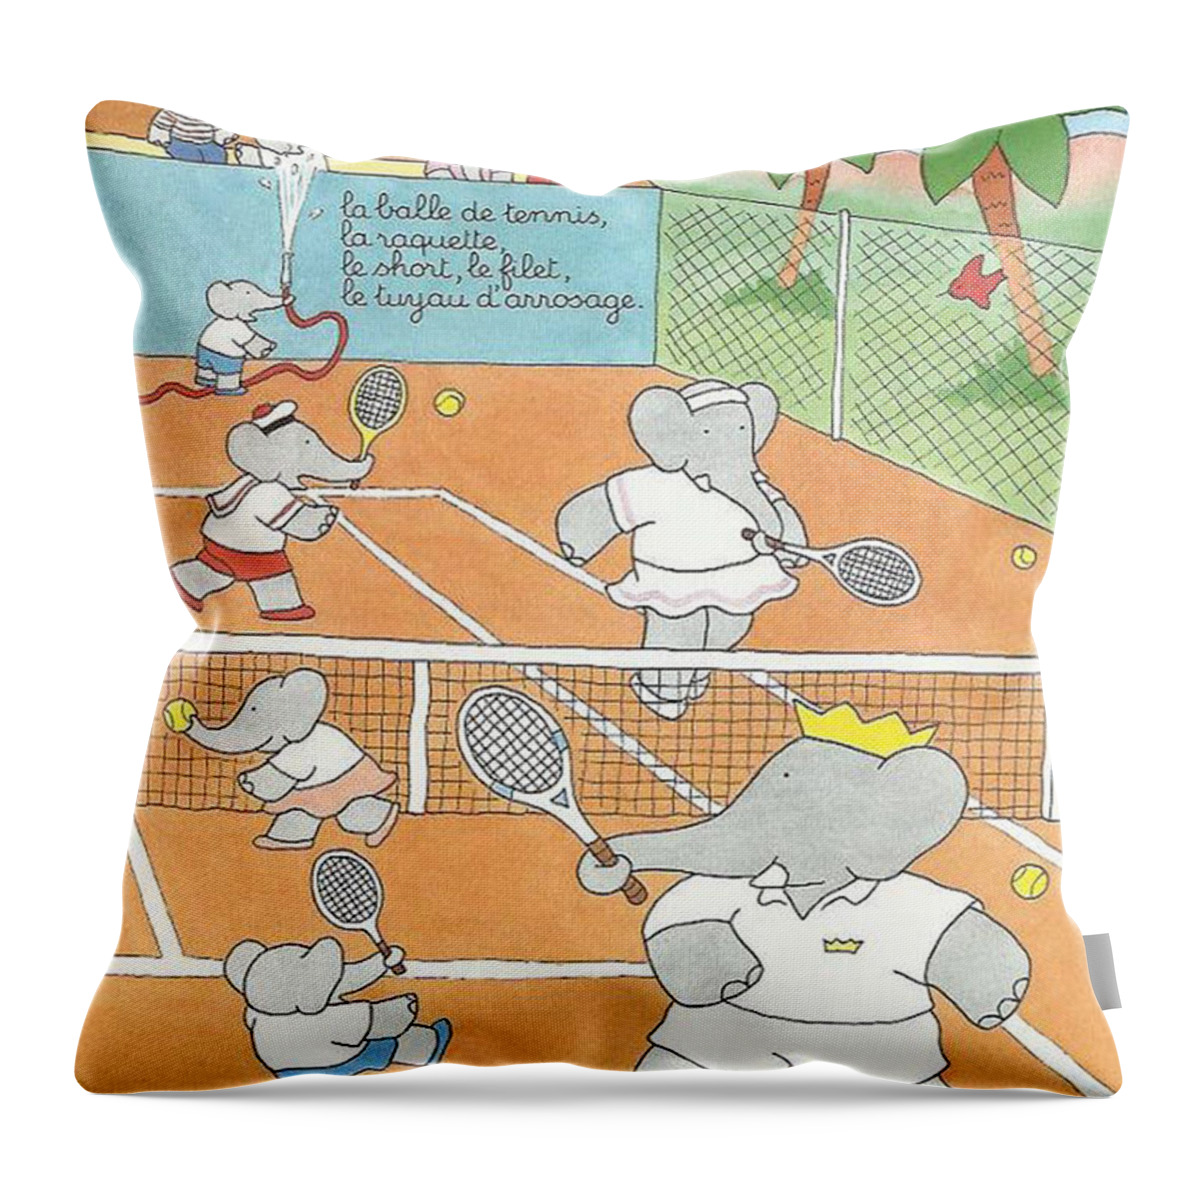 Babar The Elephant Throw Pillow featuring the drawing Babar au tennis #1 by Jean de Brunhoff